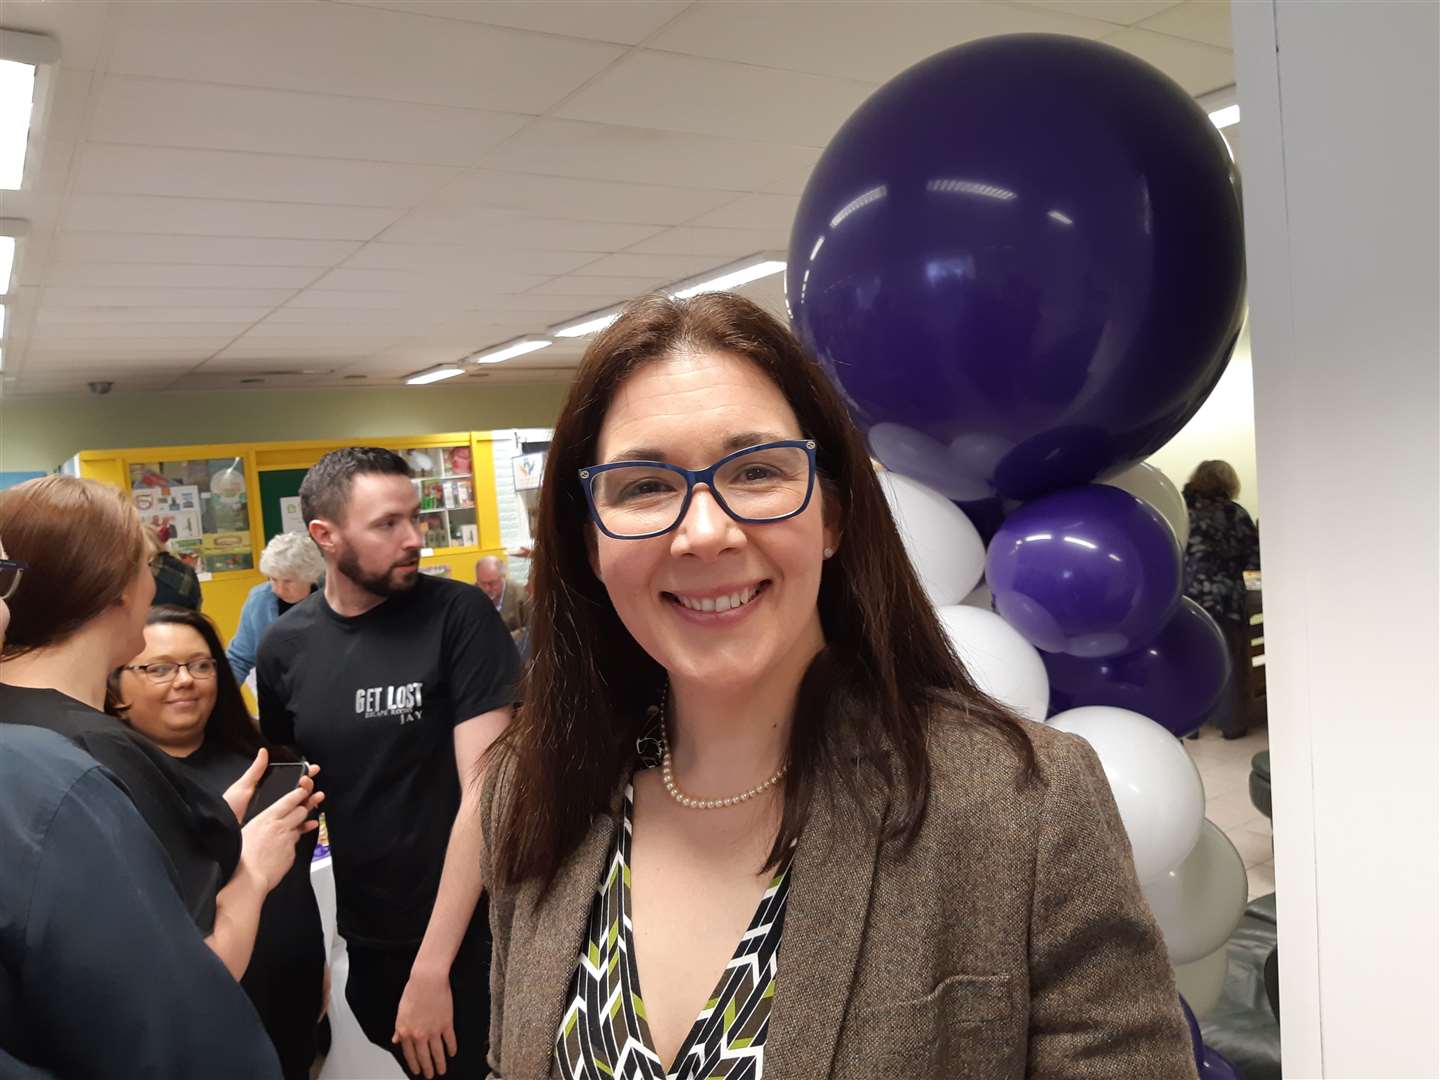 Apprentice contestant Elizabeth McKenna opened the Co-Innovation Hub in Dover in March 2019